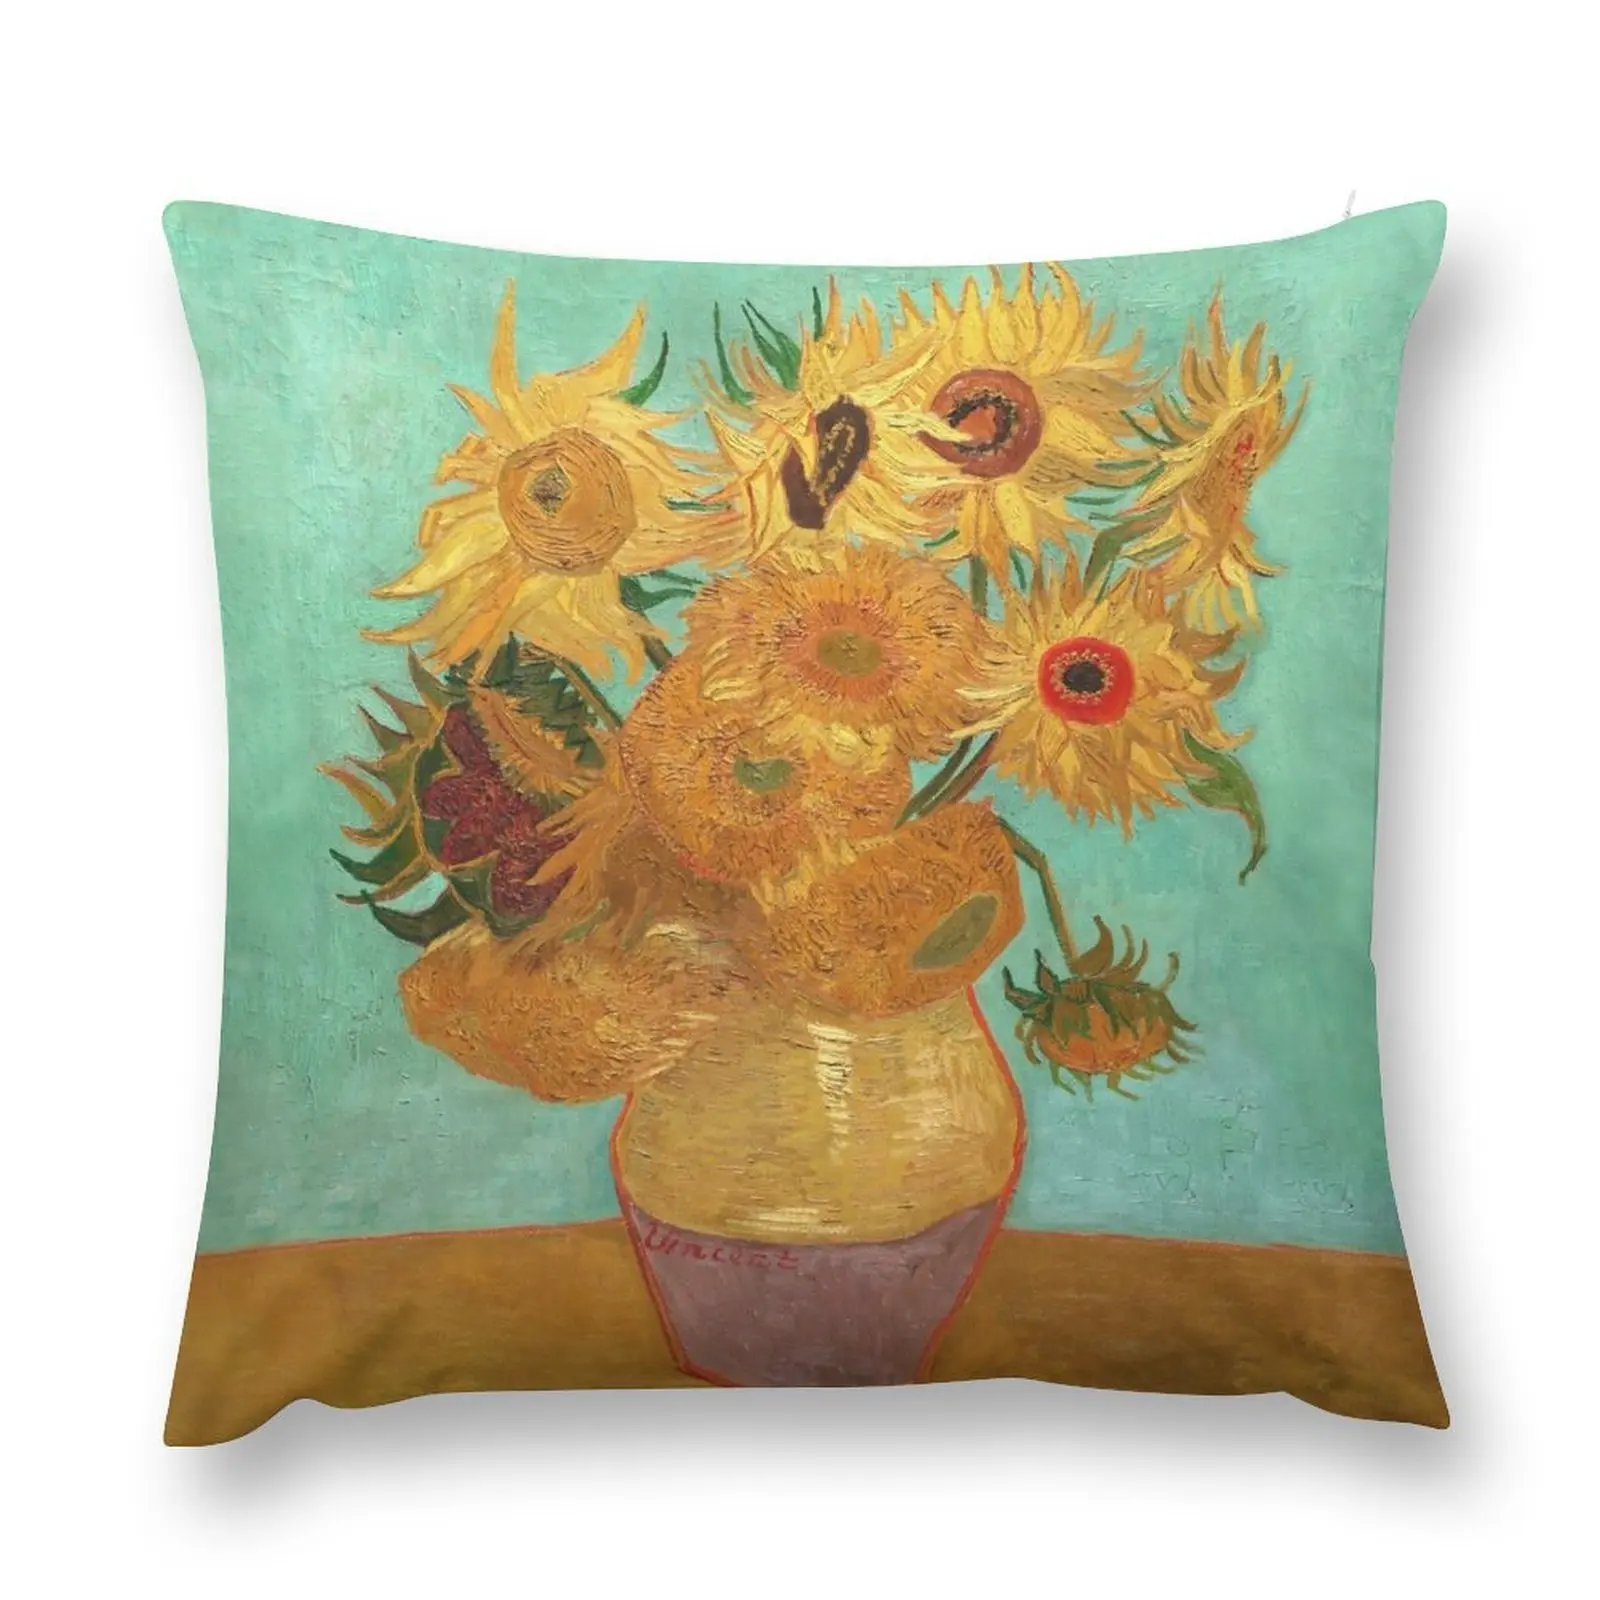 

Vincent Van Gogh Twelve Sunflowers In A Vase Throw Pillow Cushion Cover Luxury luxury decor luxury home accessories